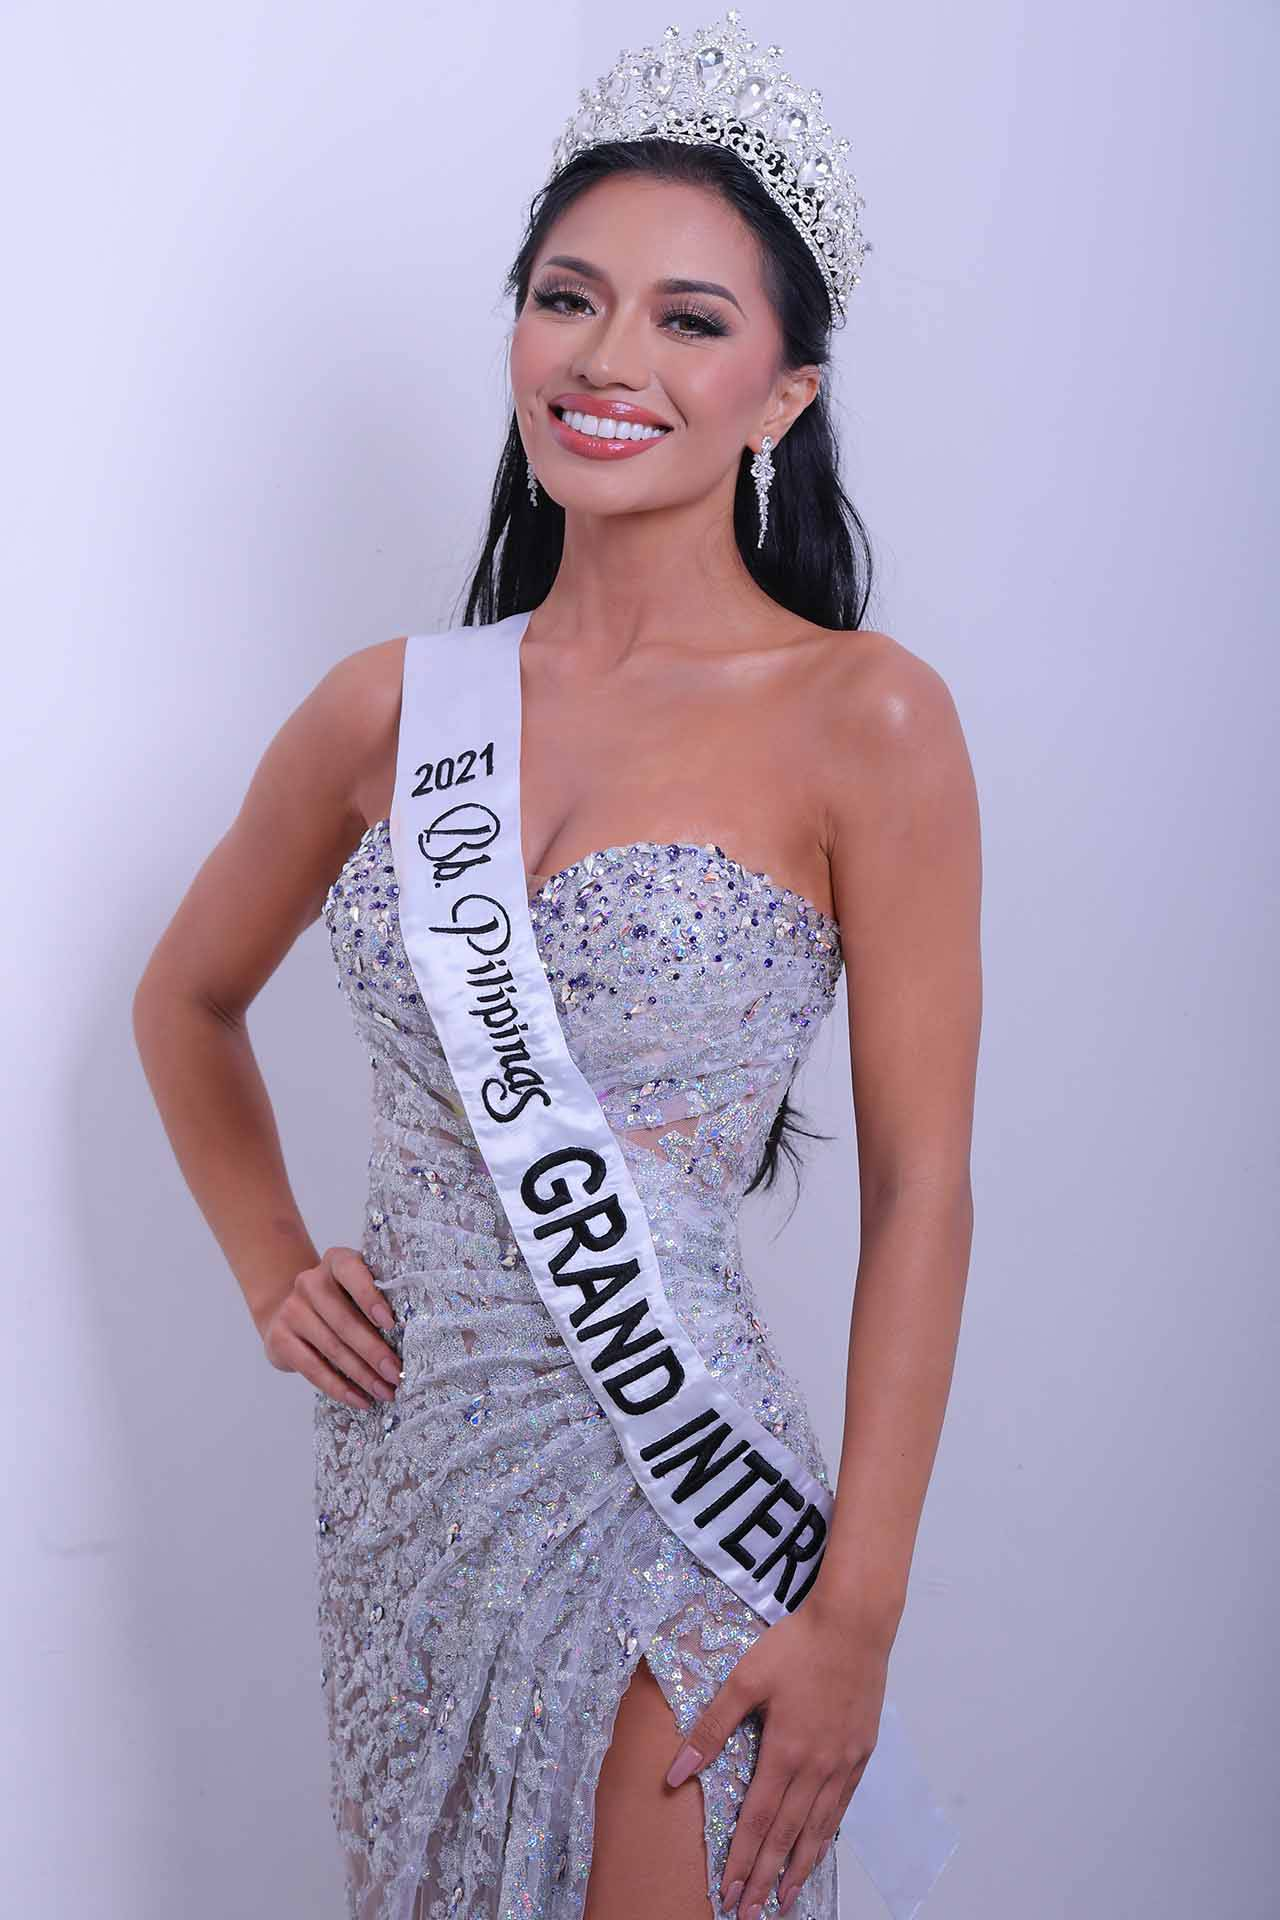 Samantha Panlilio Biography: 13 things about Miss Grand Philippines 2021